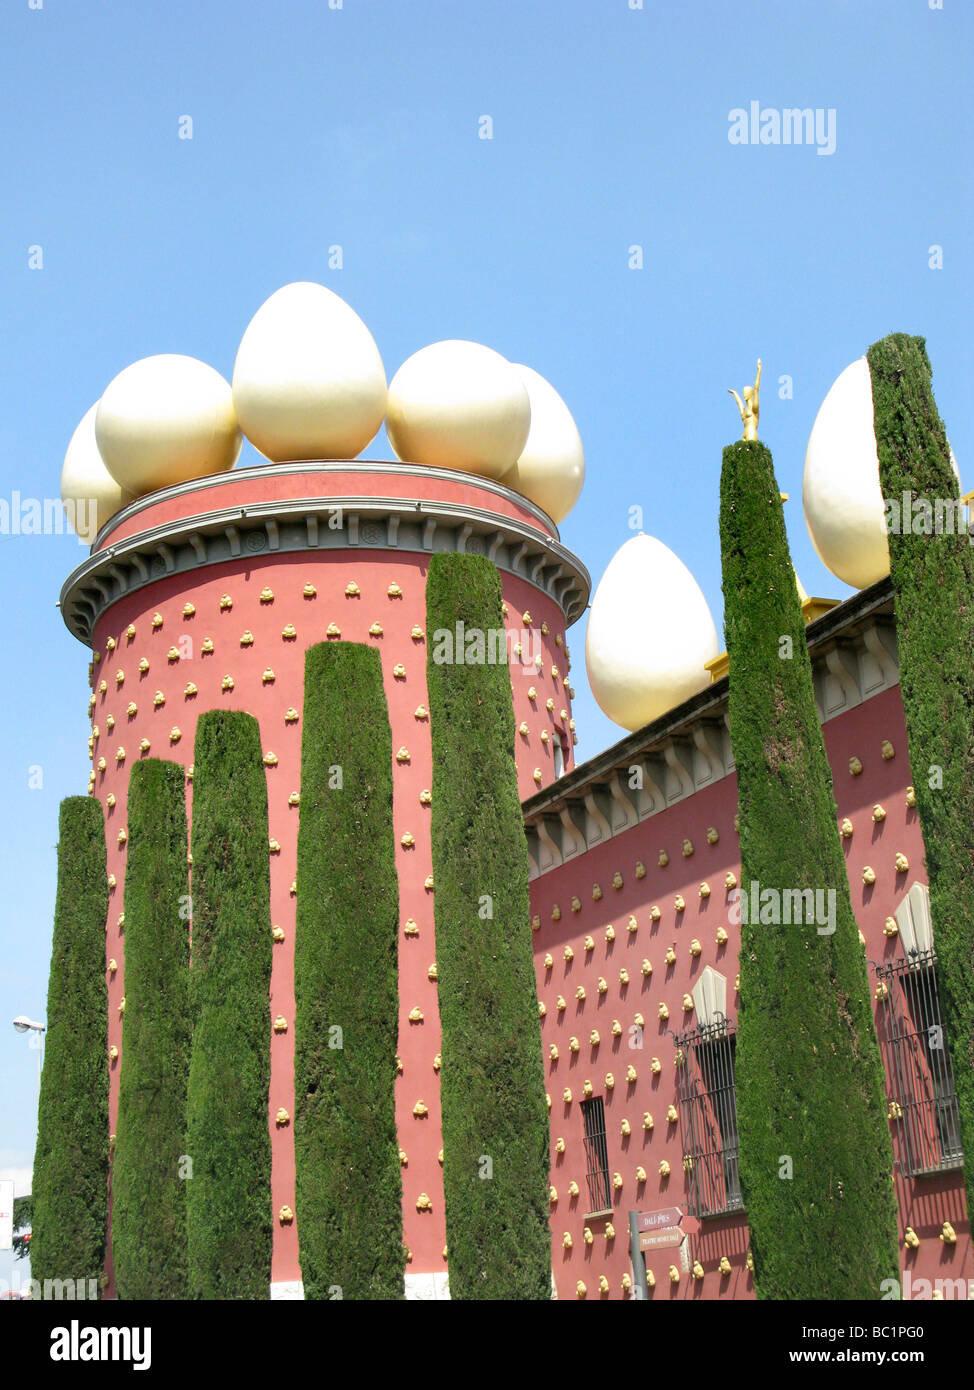 EXTERIOR VIEW OF SALVADORE DALI HOUSE MUSEUM FIGUERES SPAIN Stock Photo